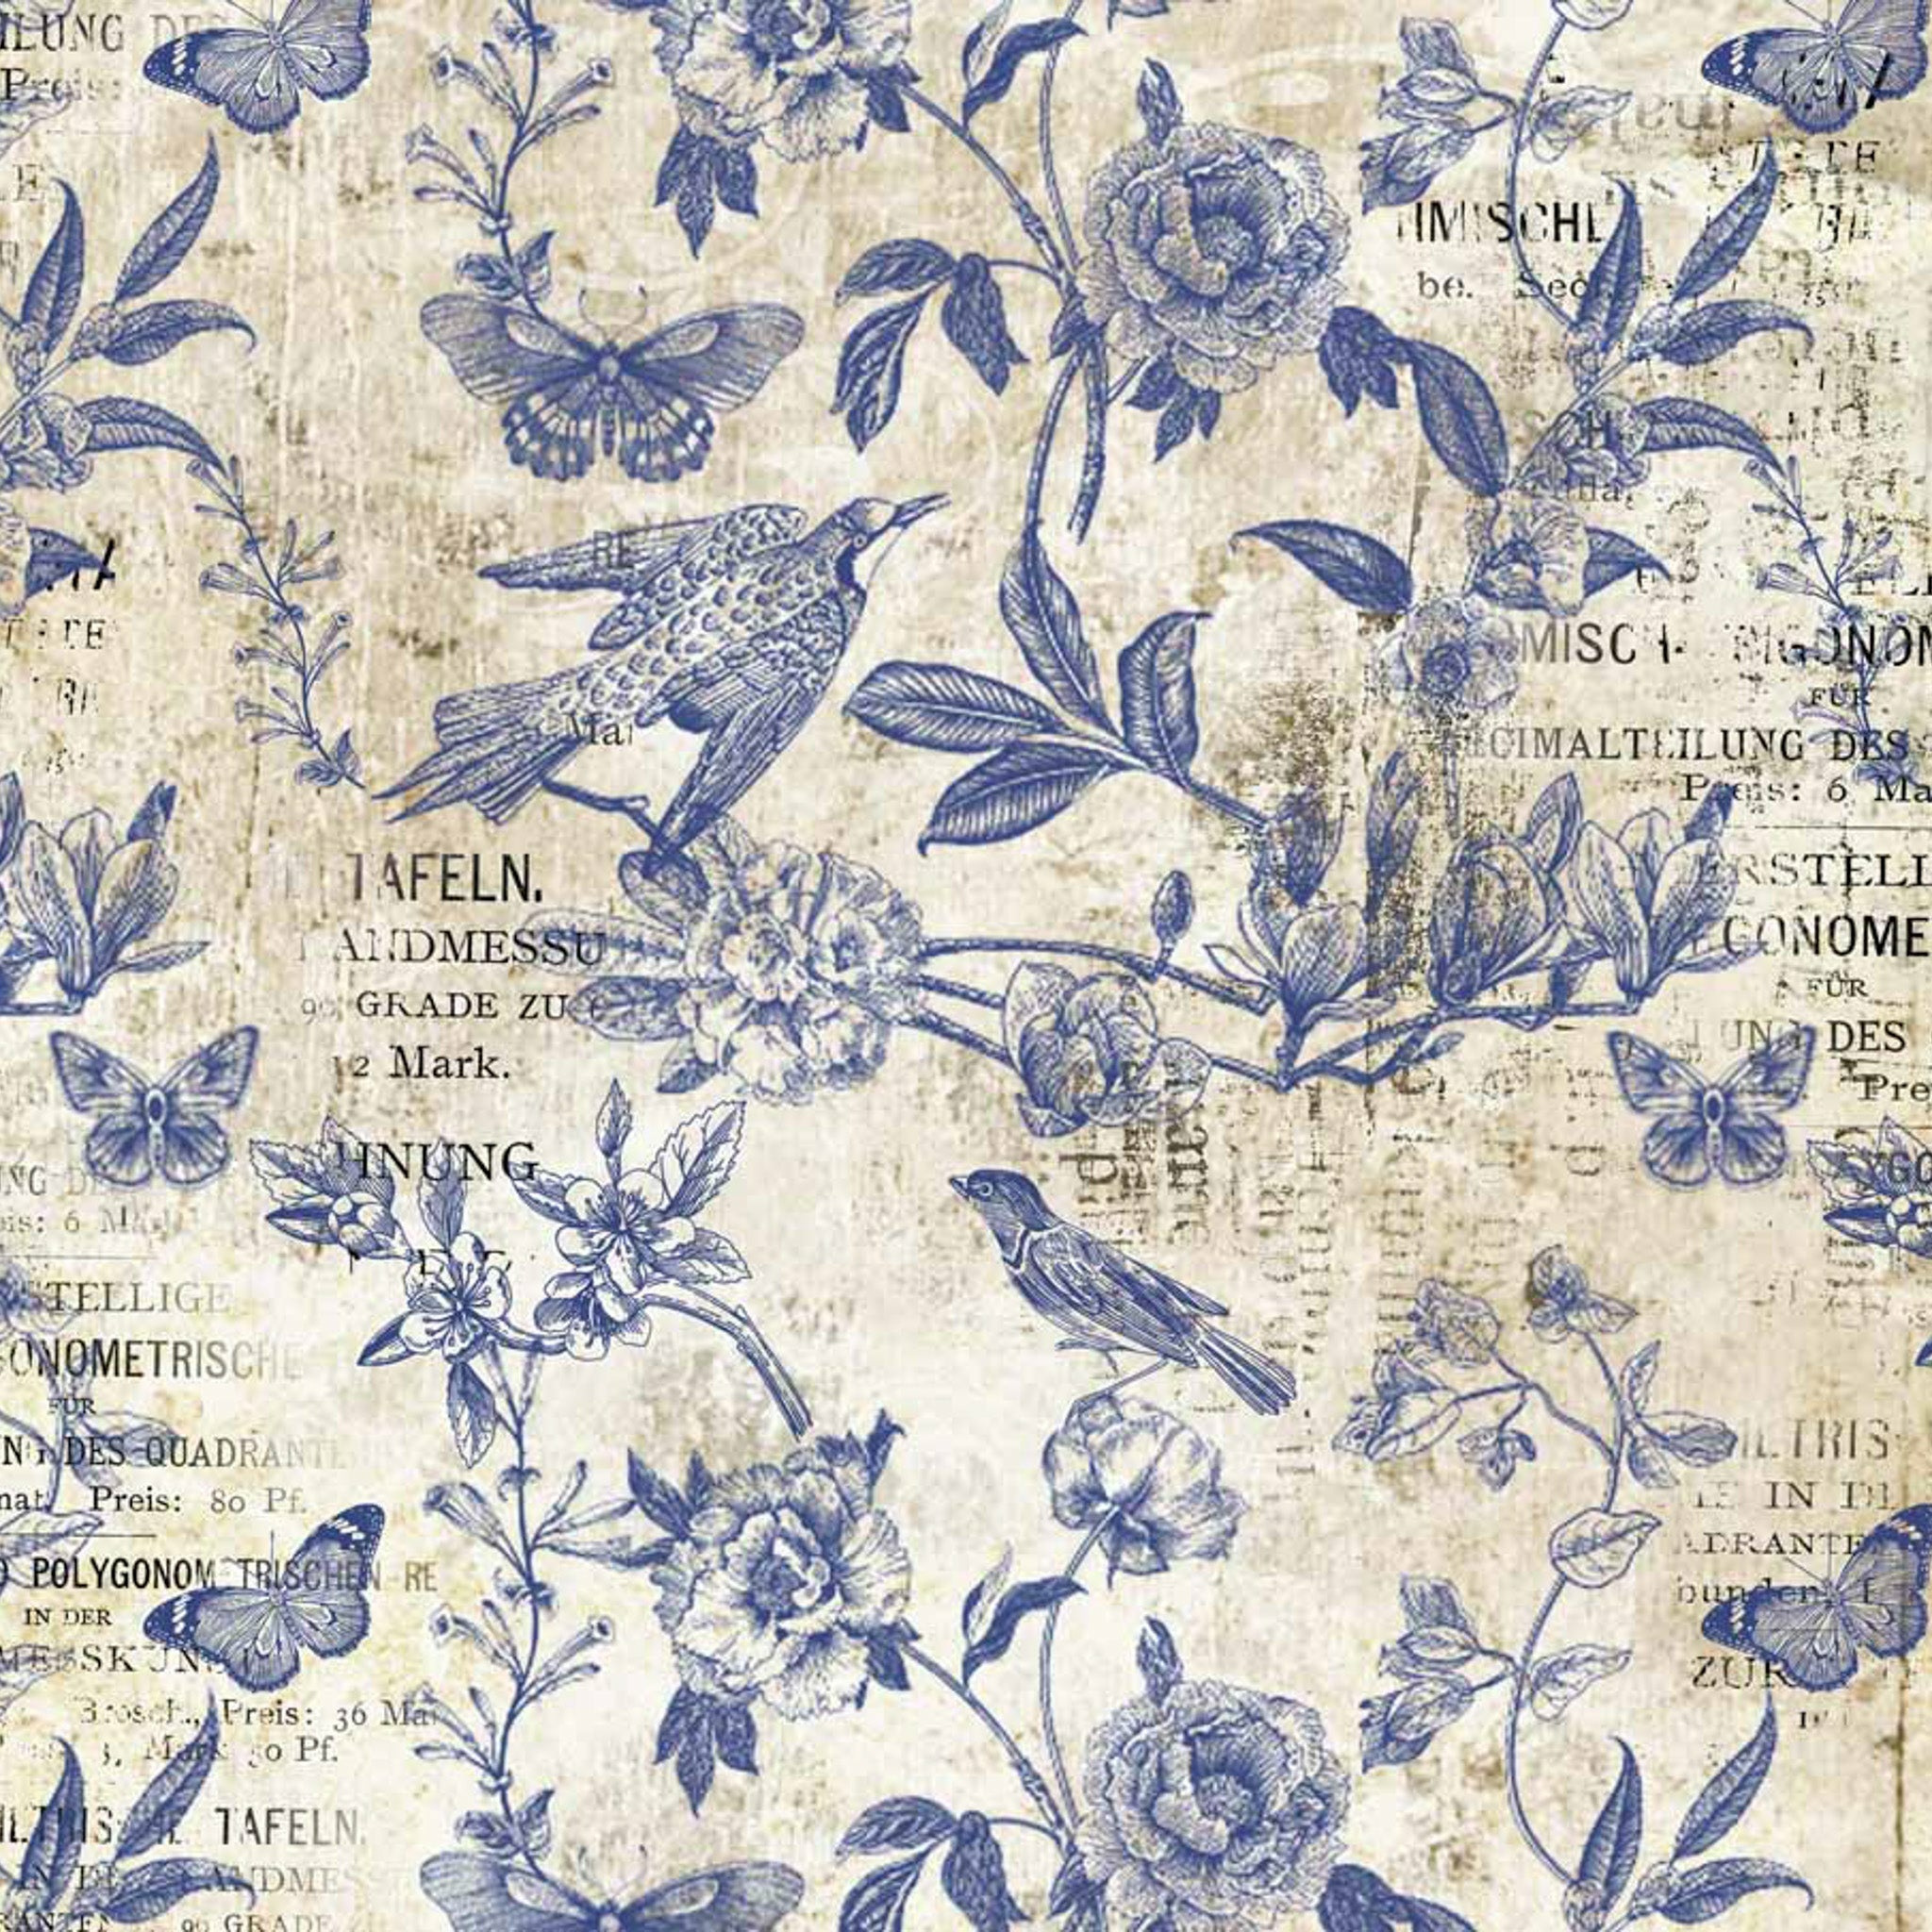 A0 rice paper design that features blue stamped birds, butterflies, and vining flowers on vintage magazine paper.